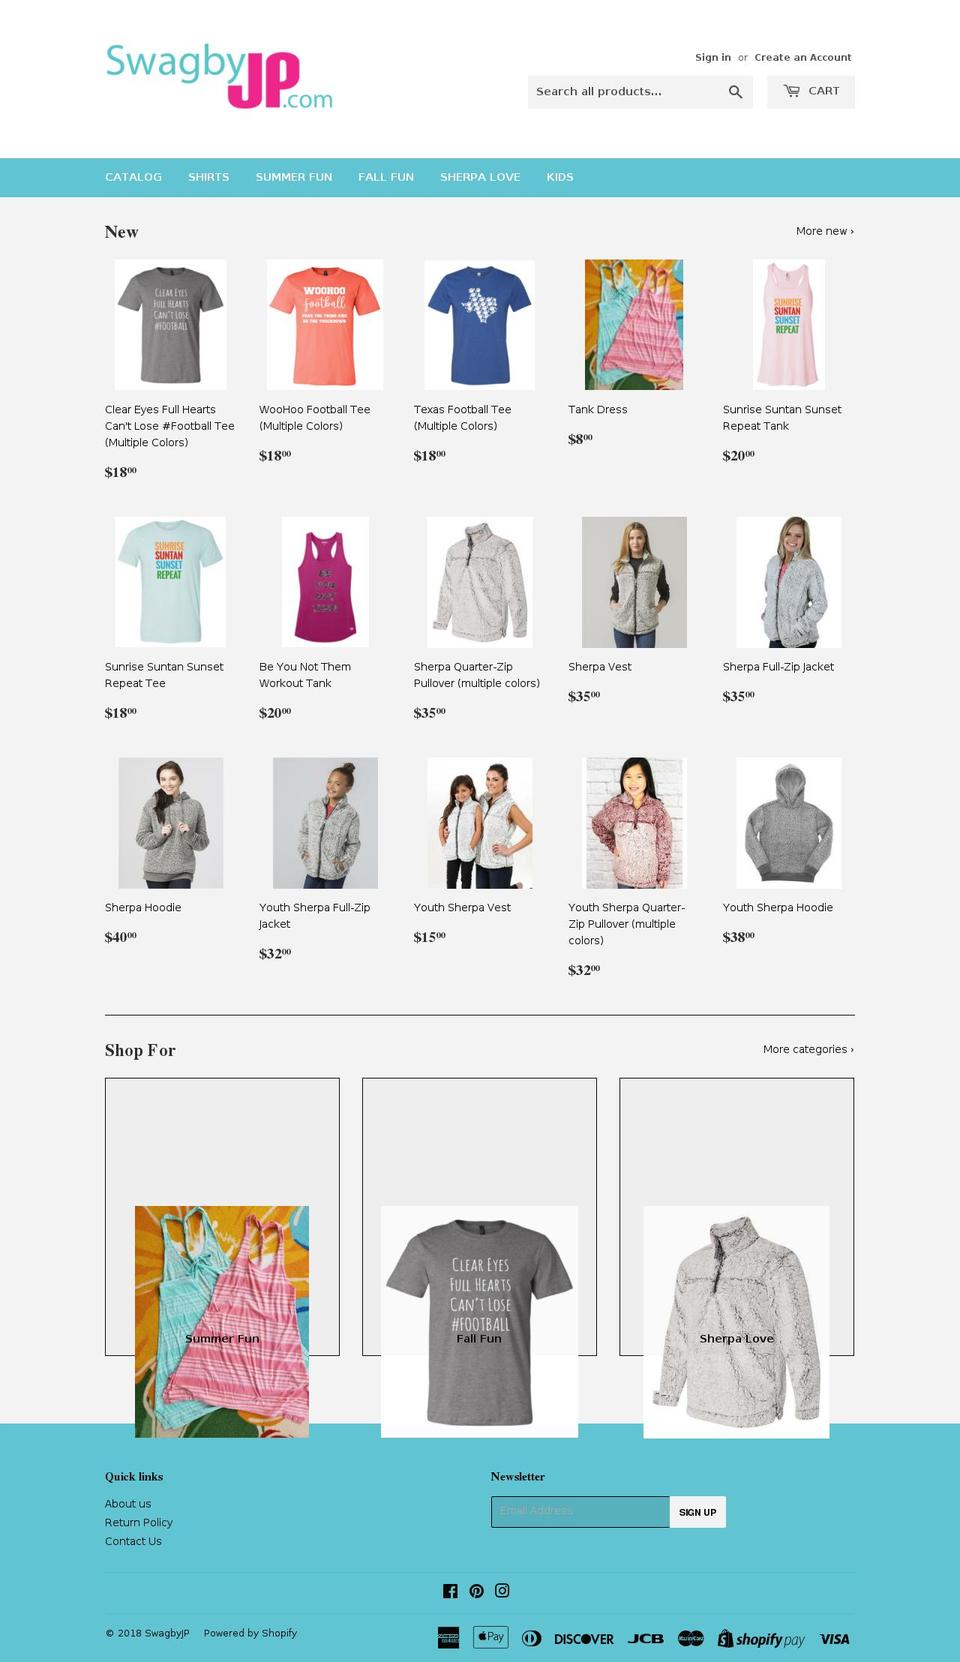 Copy of Boundless Shopify theme site example swagbyjp.com